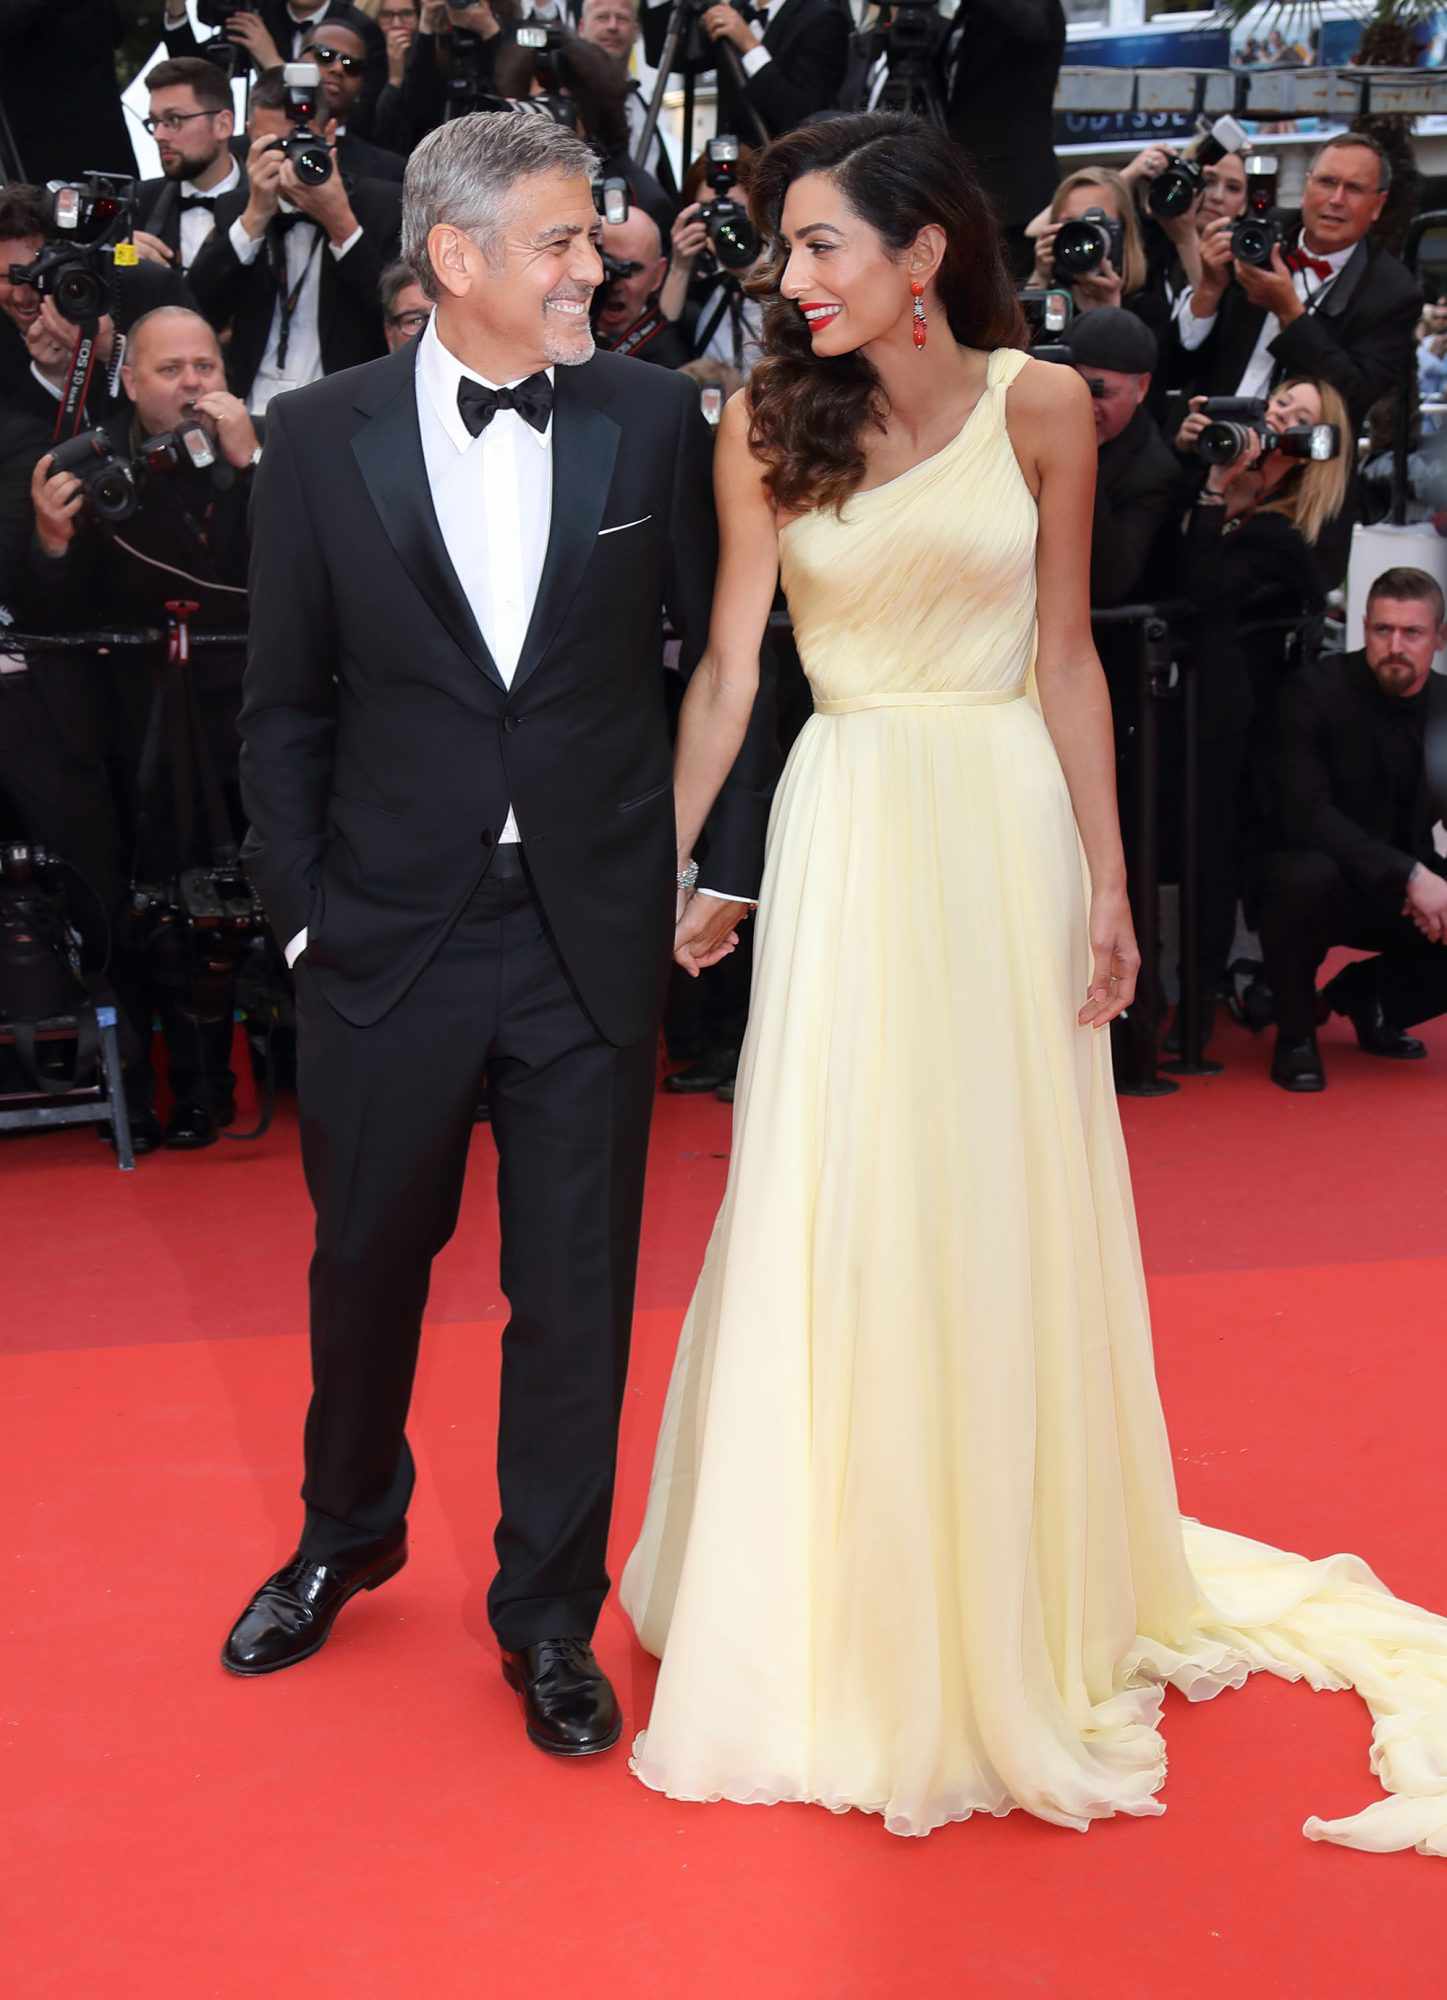 George and Amal Clooney: Hollywood's Best-Dressed Duo - See Their Stylish Looks! 18